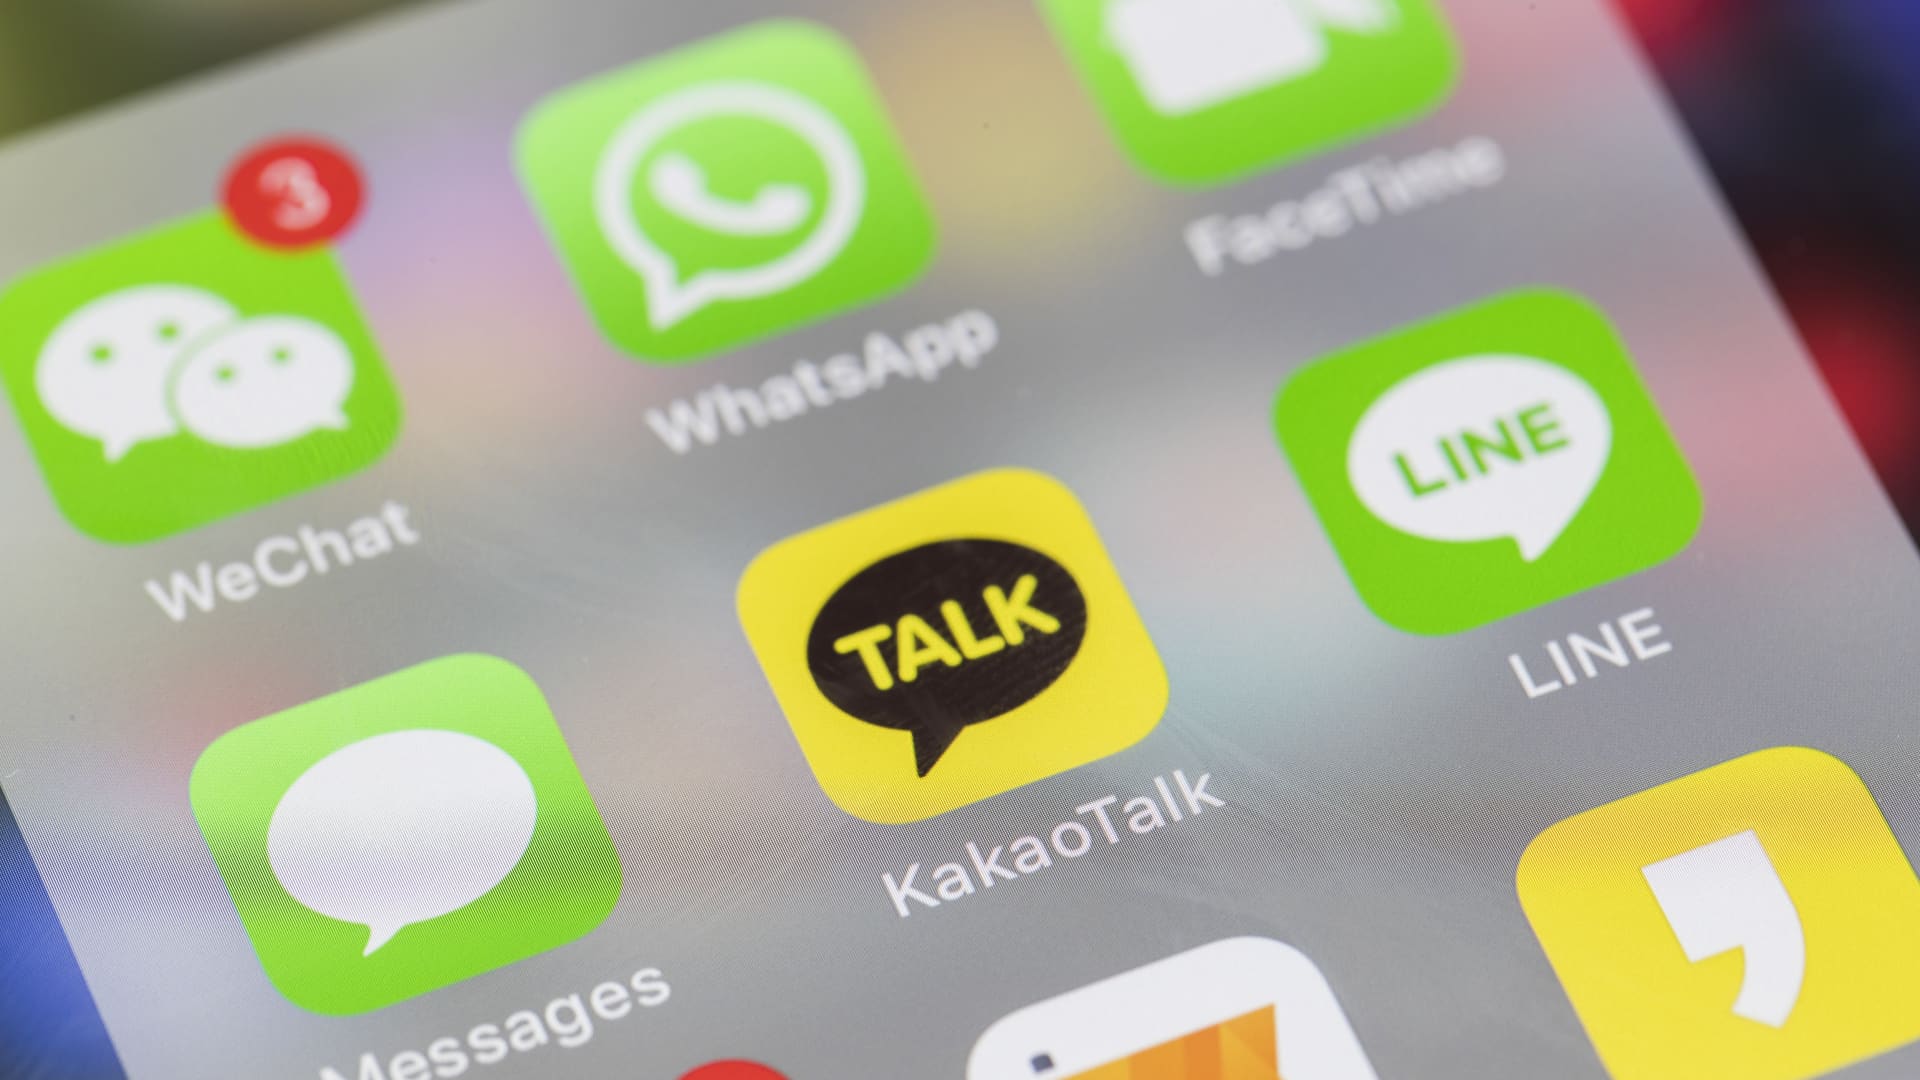 A smart phone with the icons for the social networking apps KakaoTalk, WeChat, Line, WhatsApp, FaceTime, and others are seen on the screen in Hong Kong.